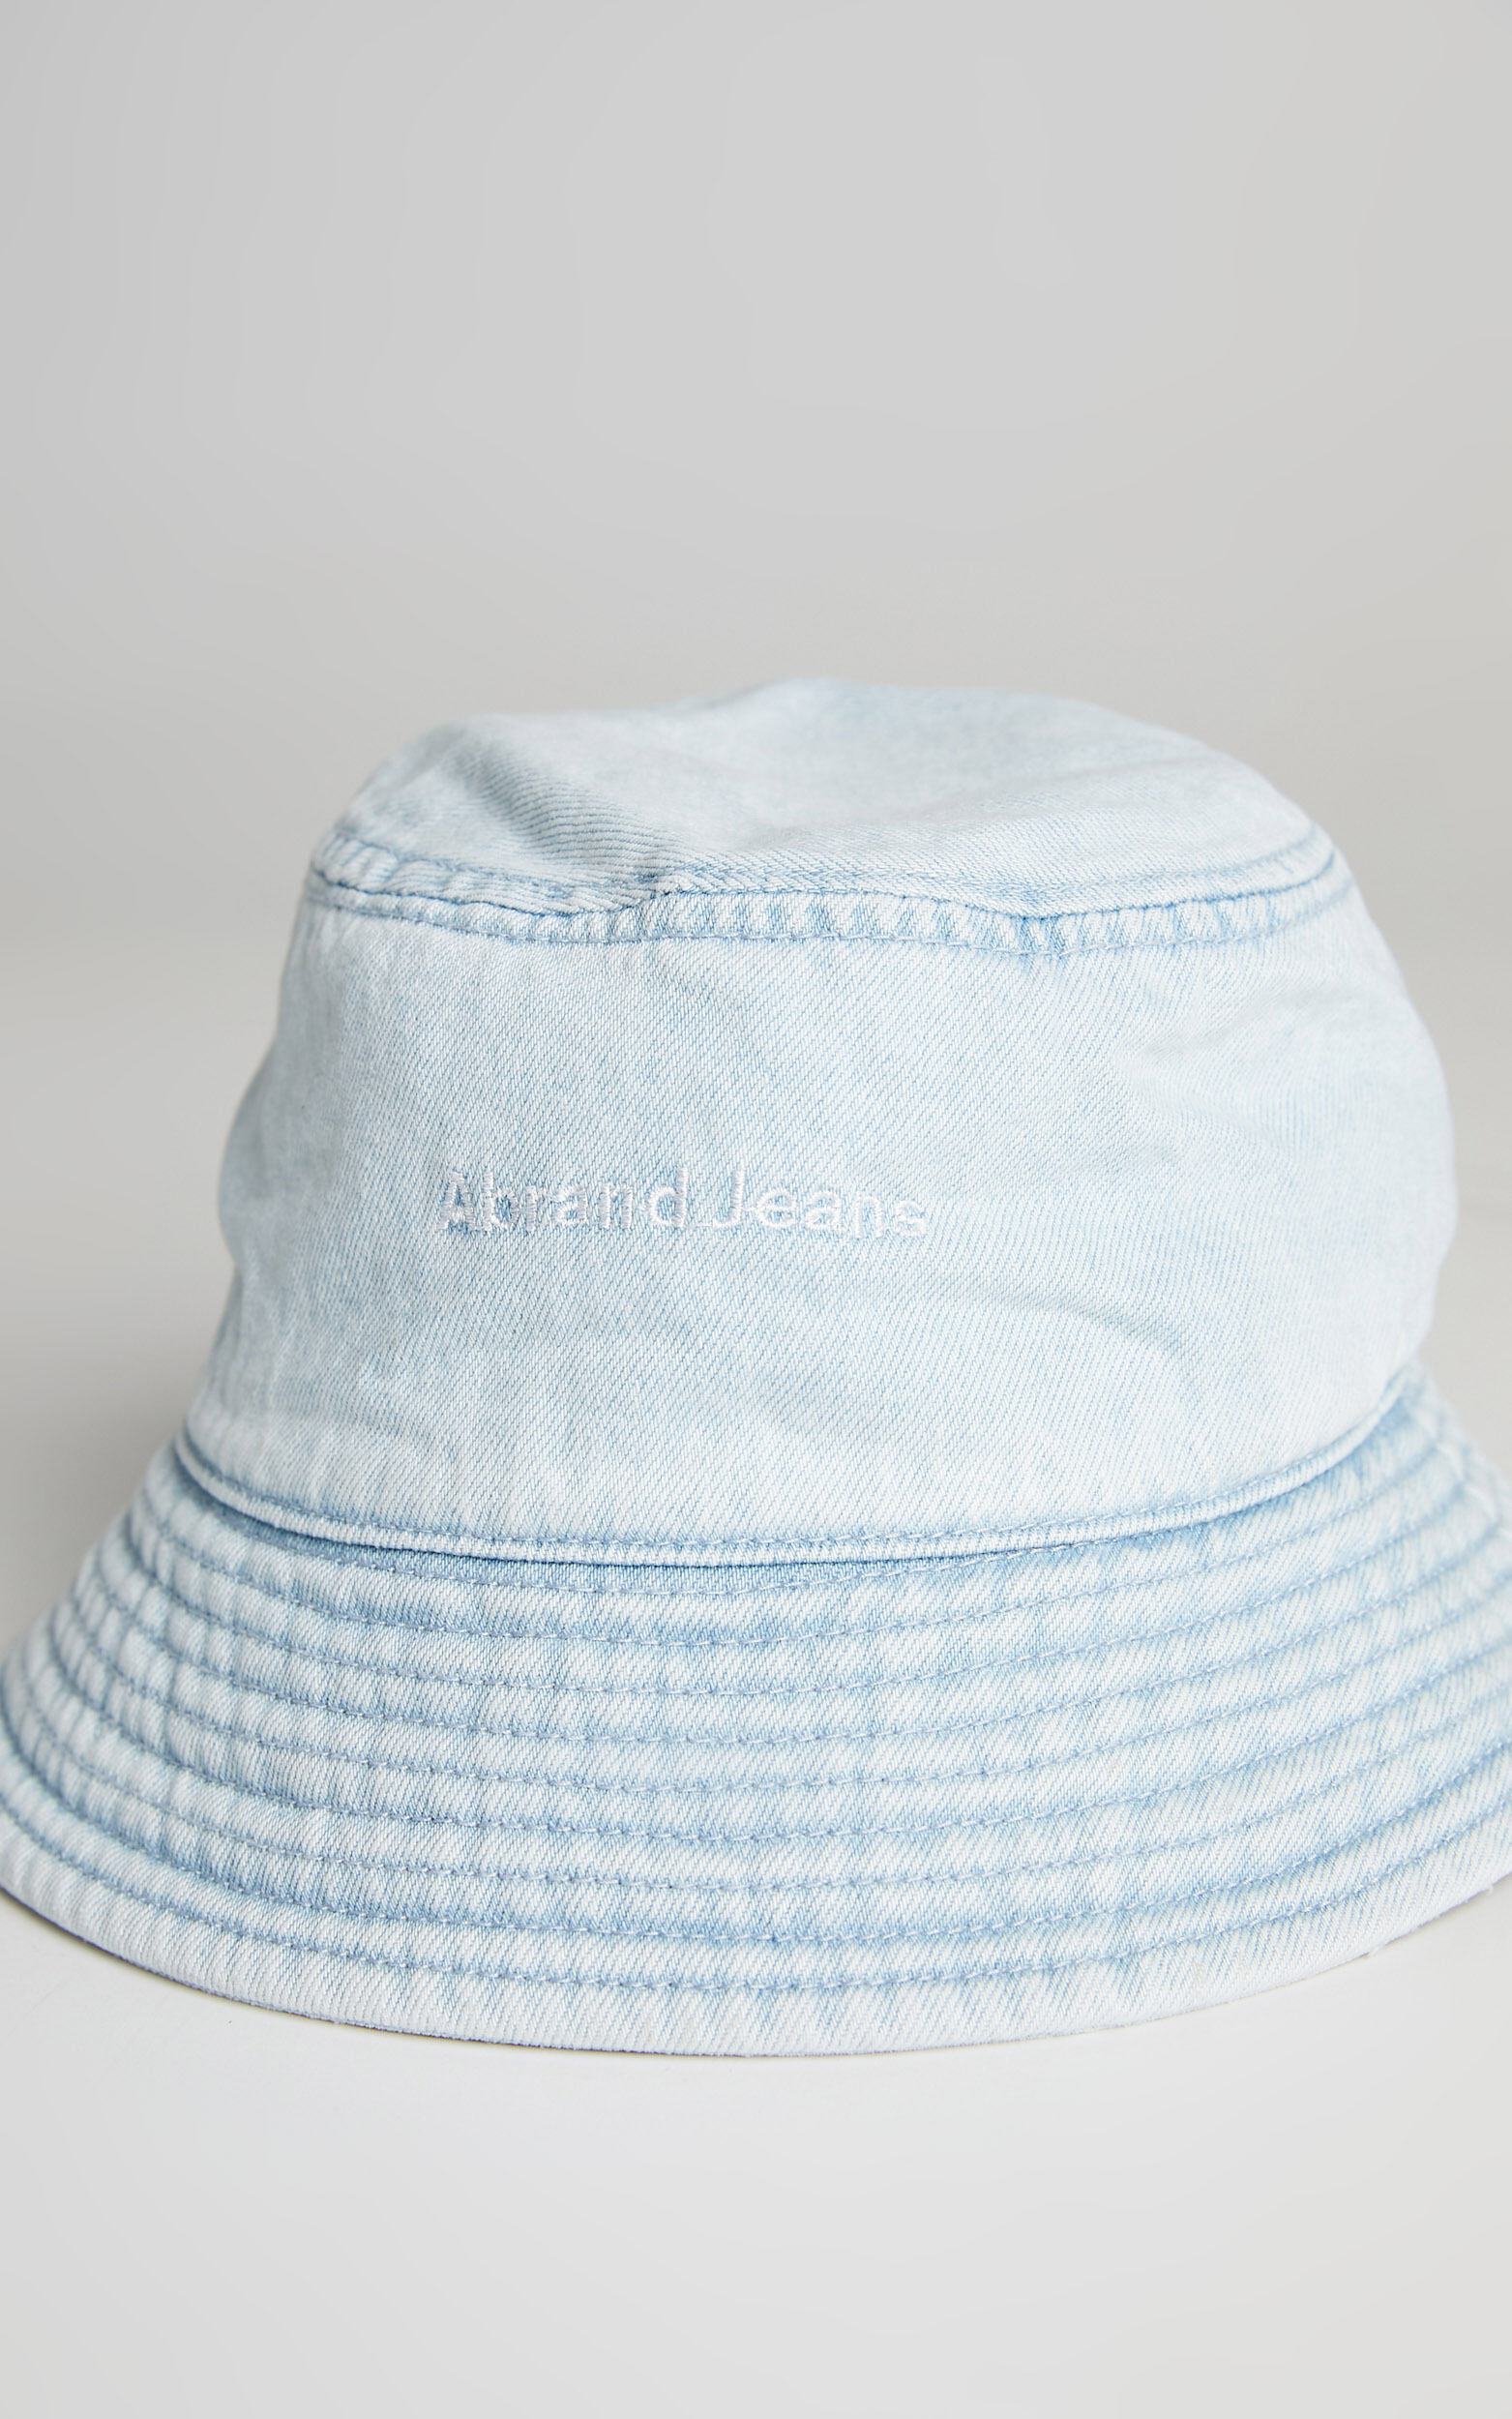 Abrand - A Bucket Hat in Walk Away - OneSize, BLU1, super-hi-res image number null